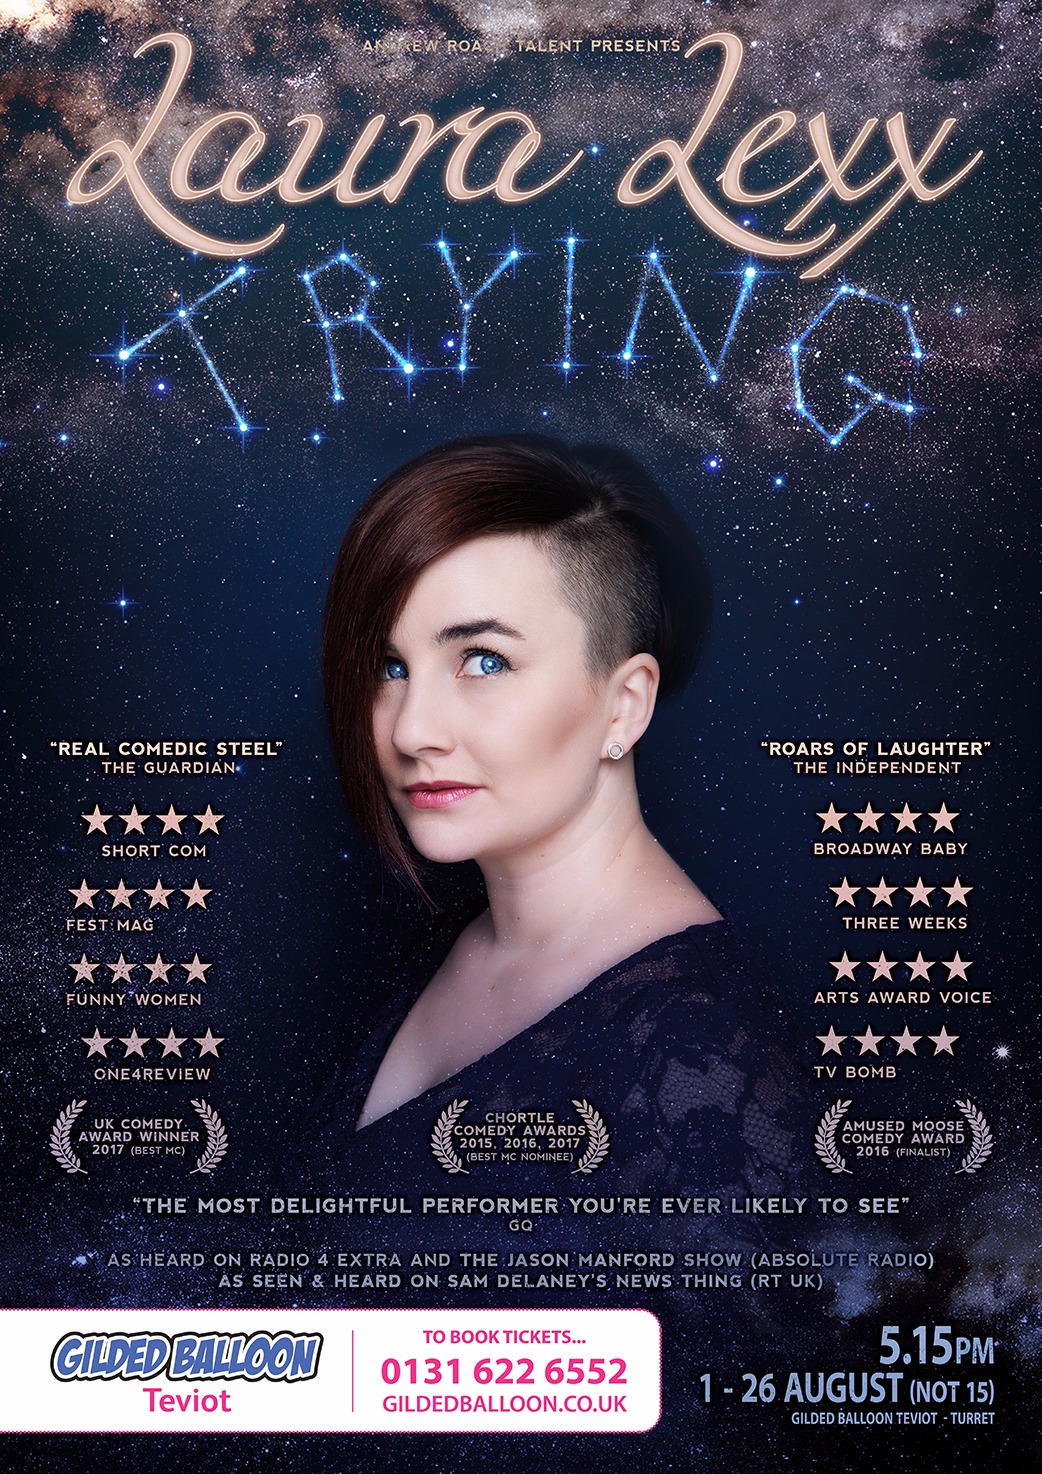 The poster for Laura Lexx: Trying